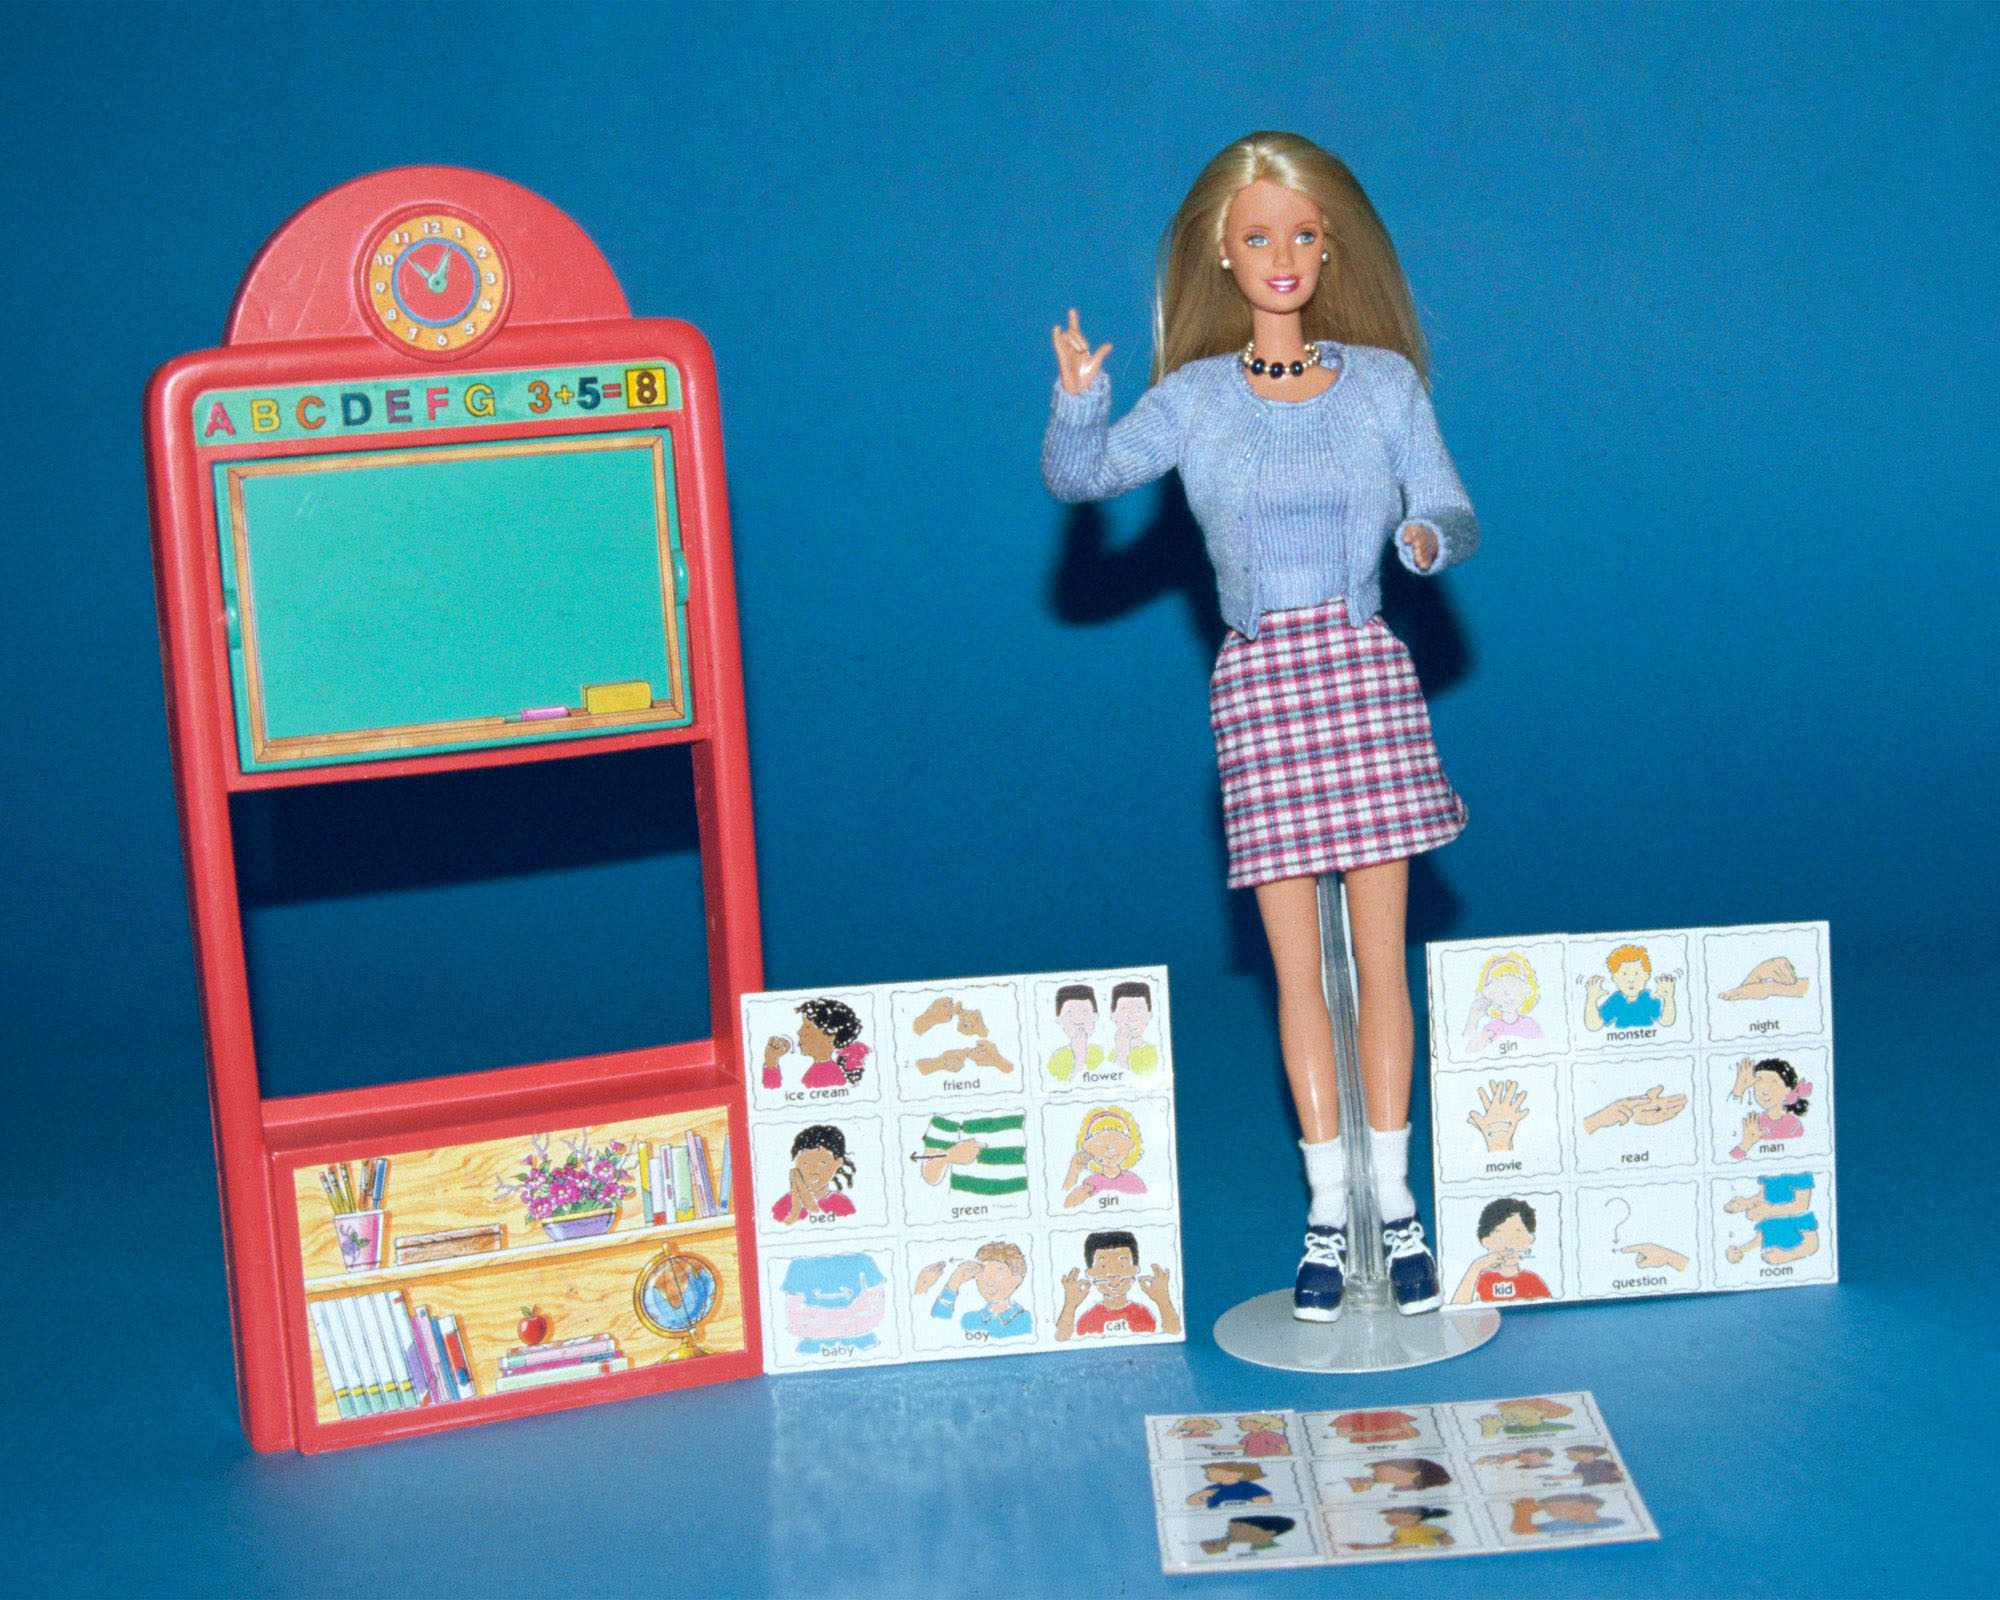 Sign Language Barbie, currently available exclusively at Toys &quot;R&quot; Us stores